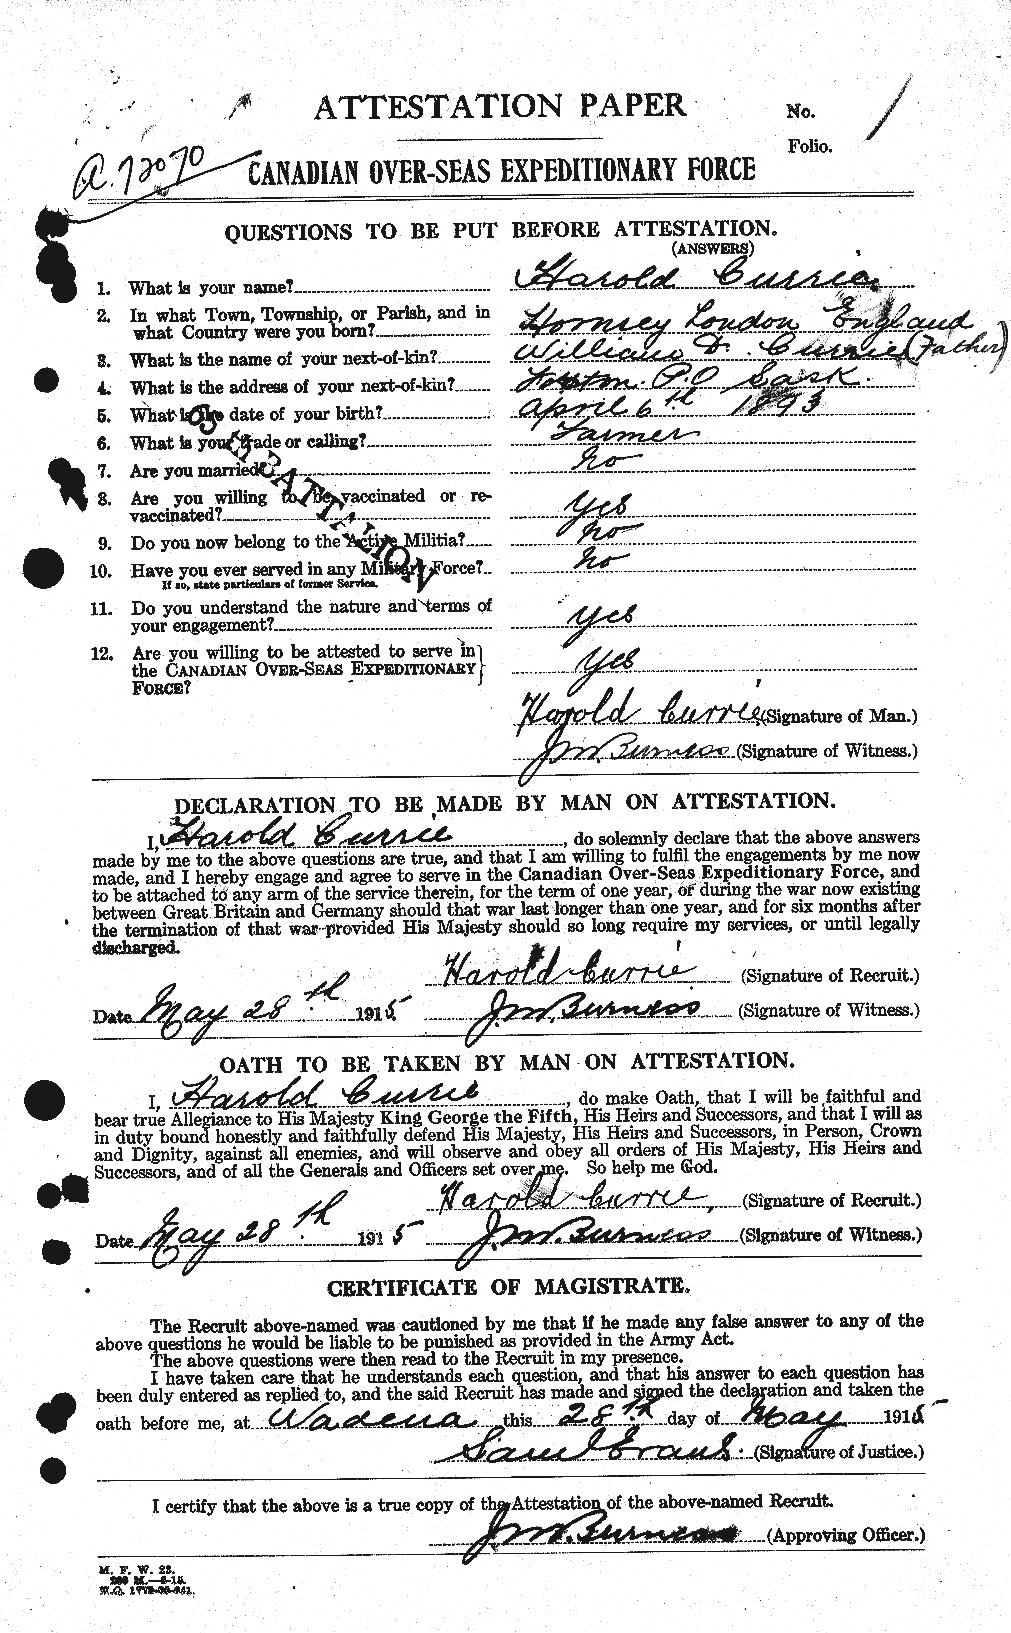 Personnel Records of the First World War - CEF 072923a